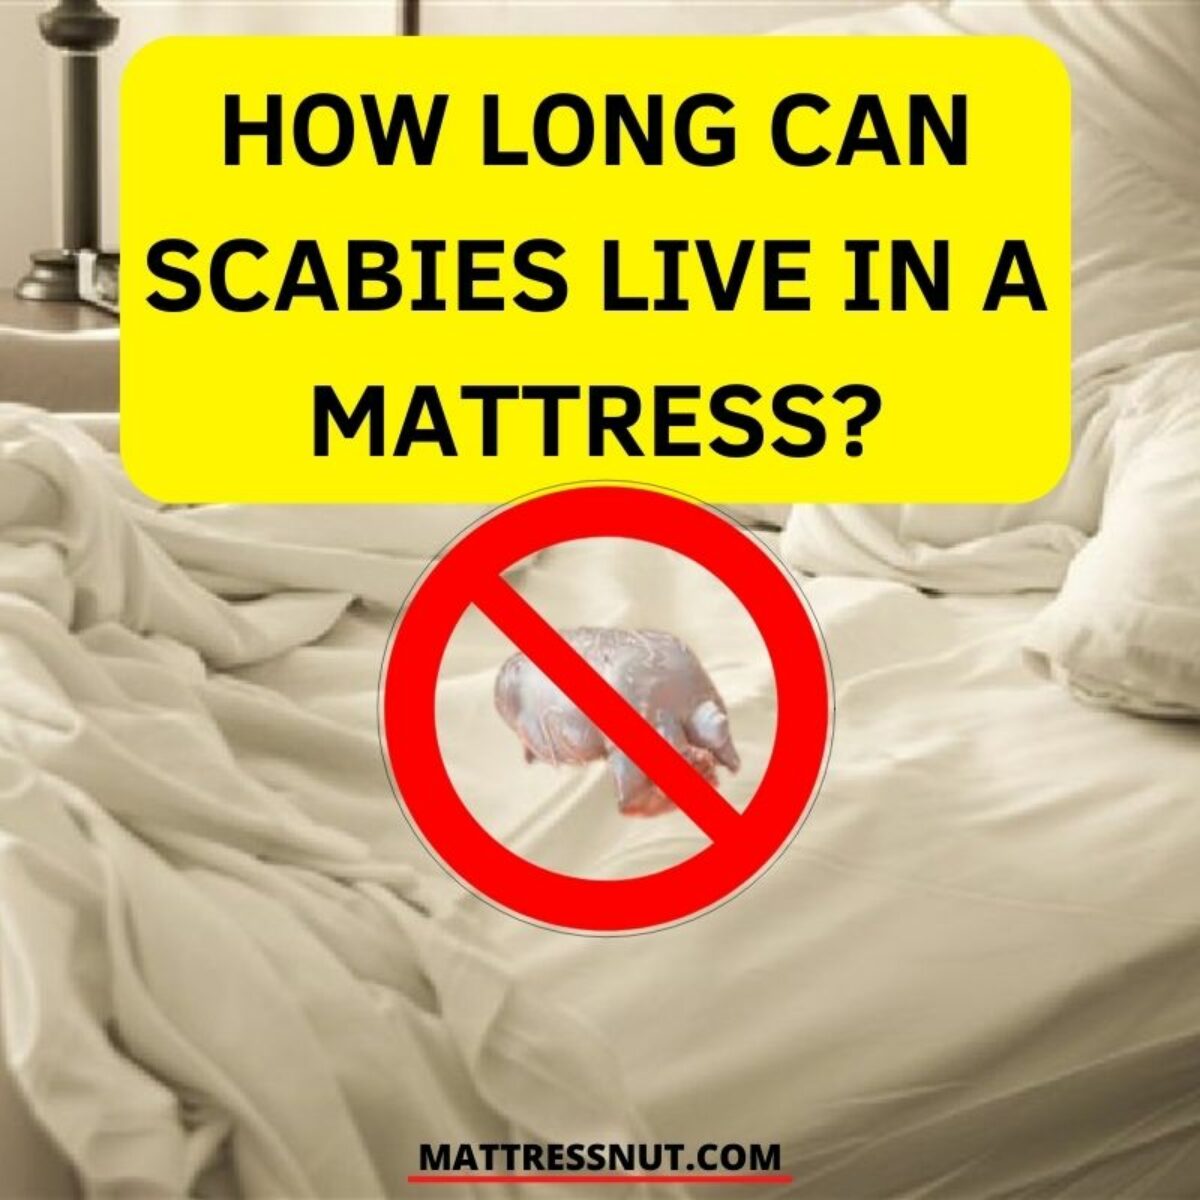 How Long Can Scabies Survive In A Mattress?